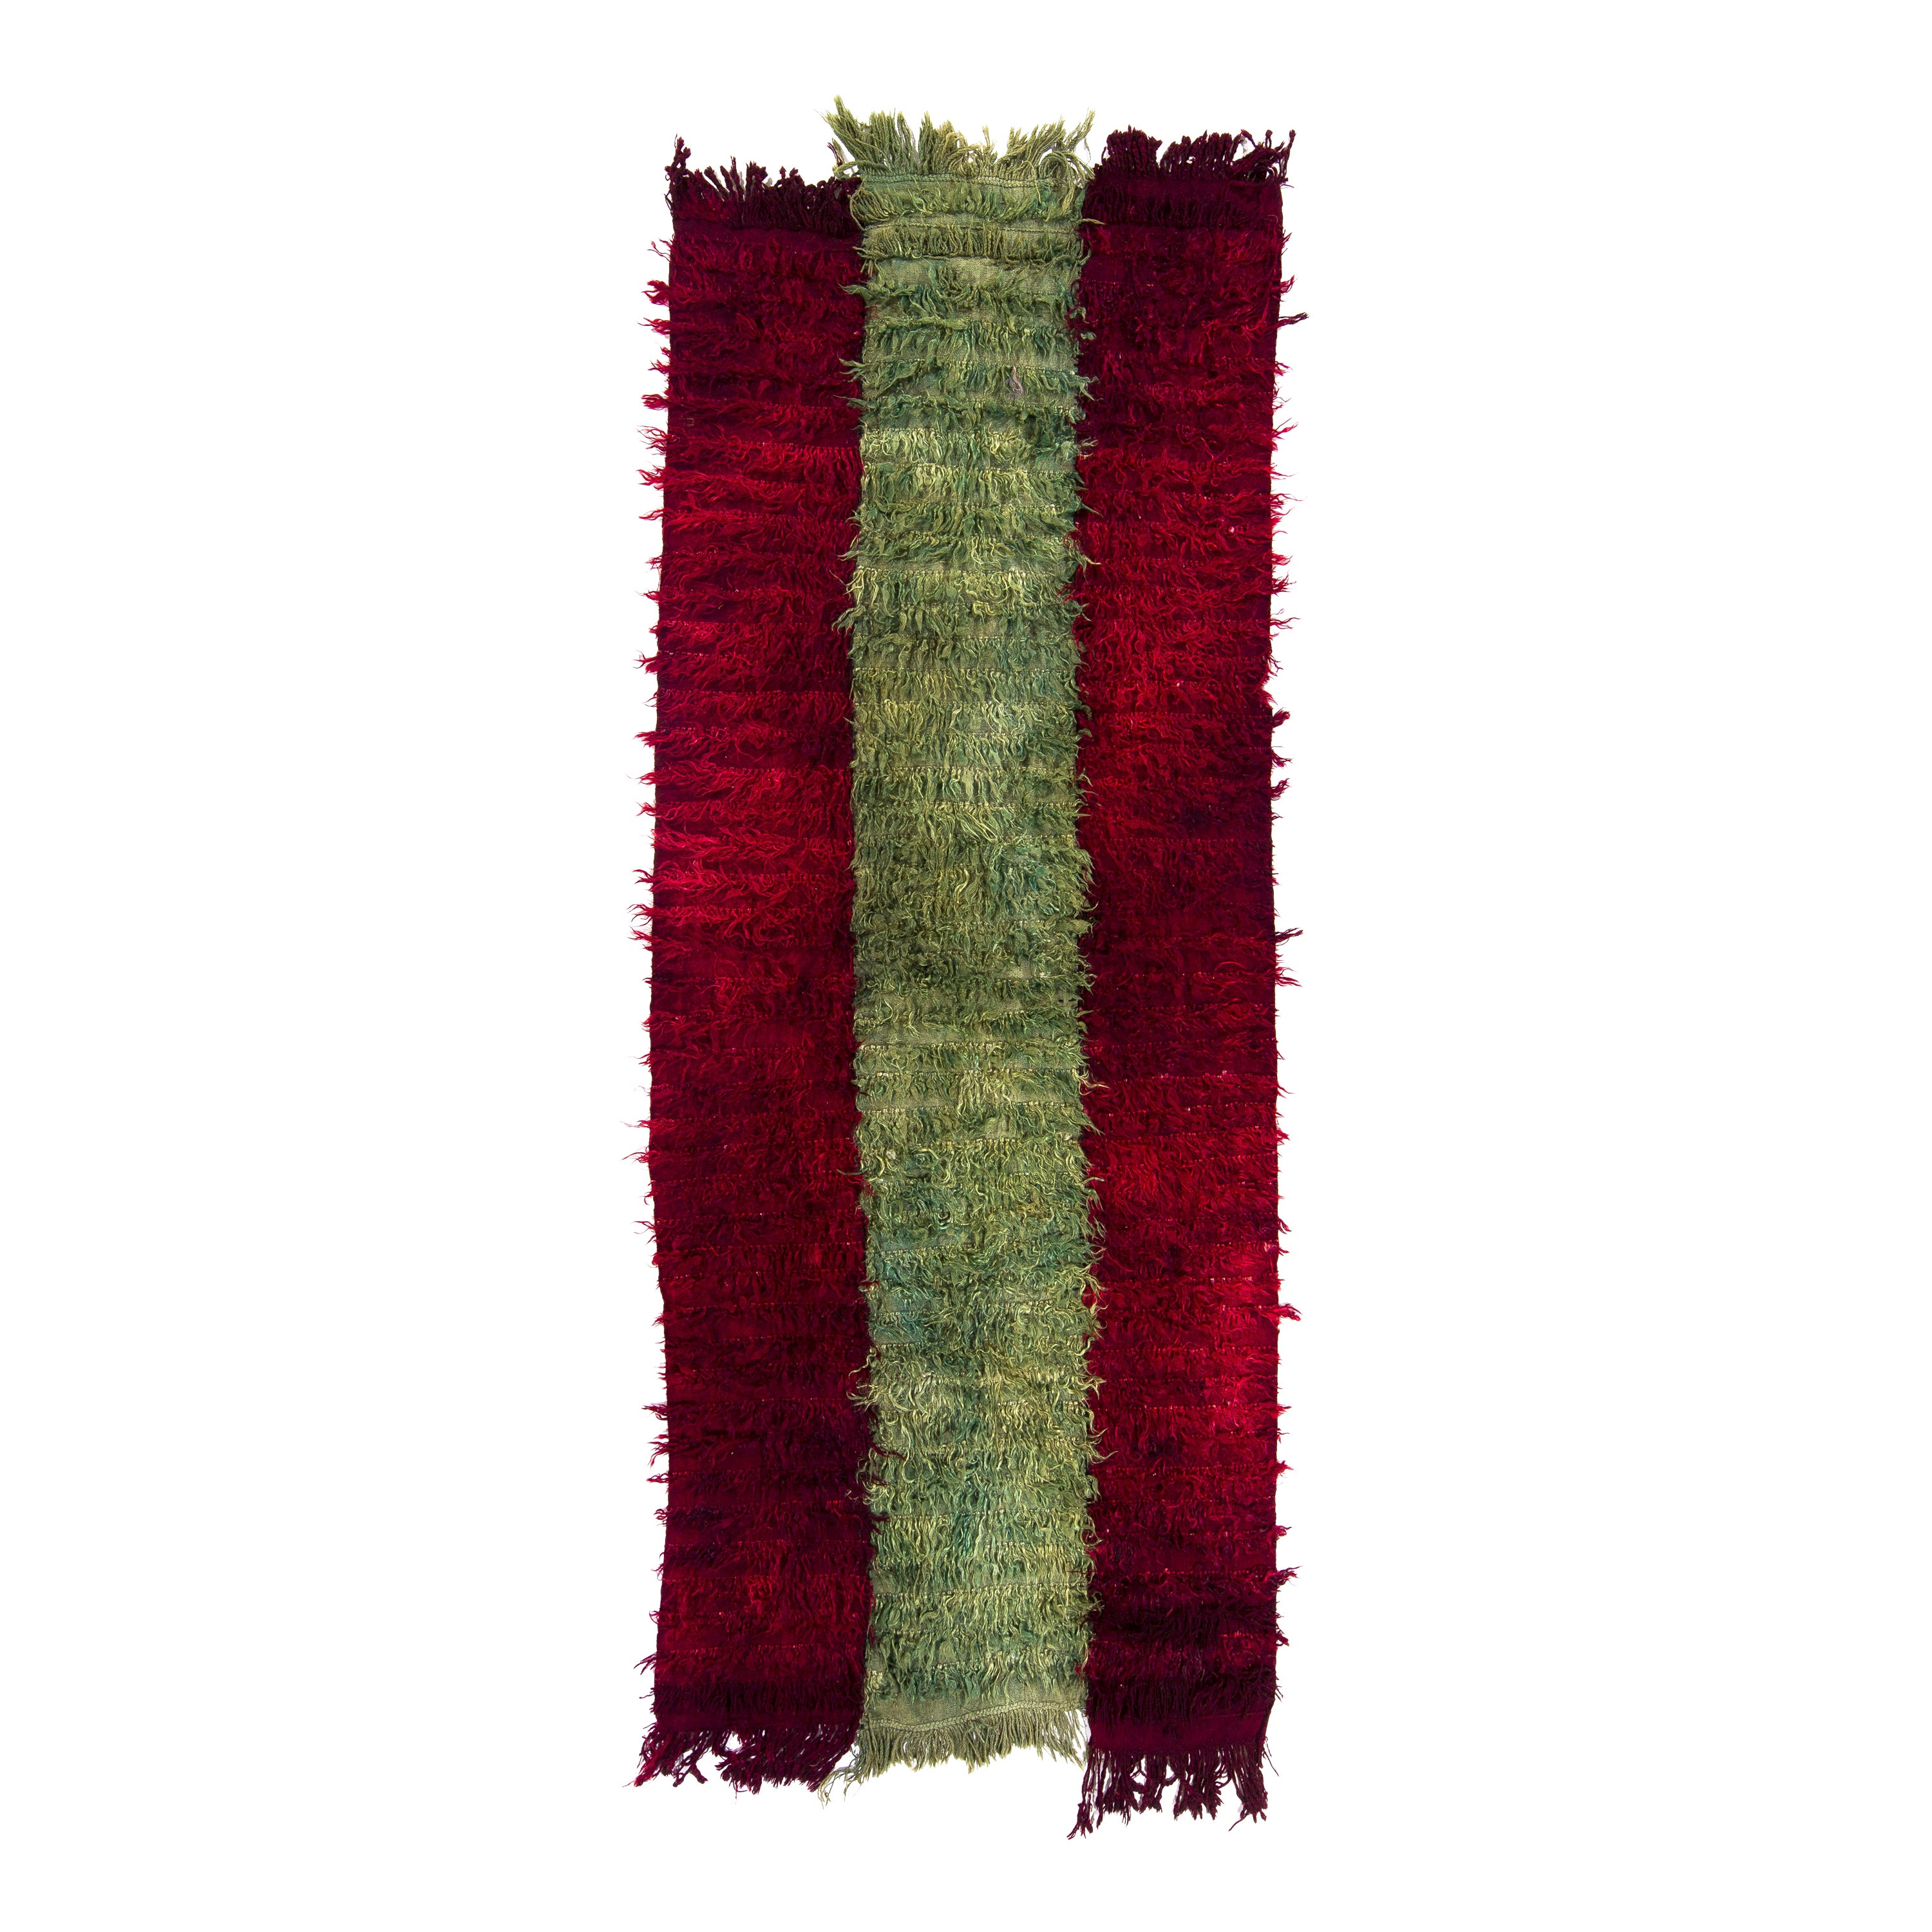 4.7x11.2 Ft Vintage Filikli Tulu Rug Made of Mohair Wool, Red and Green Colors